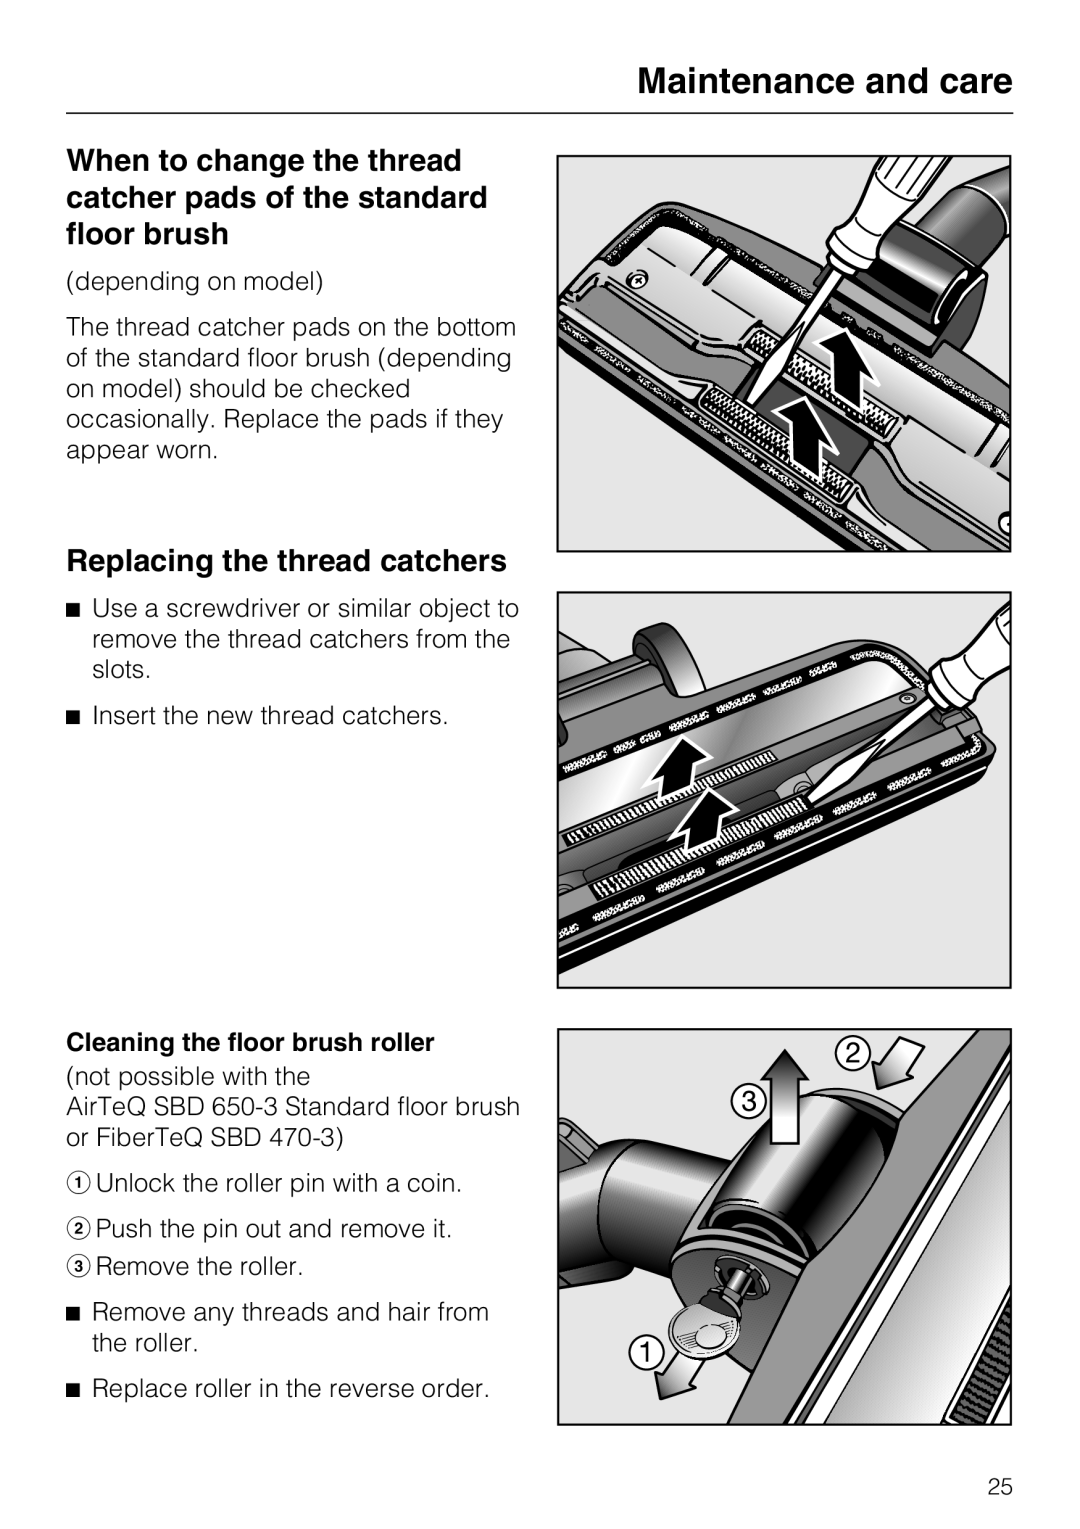 Miele S 6000 operating instructions Maintenance and care, Replacing the thread catchers, Cleaning the floor brush roller 